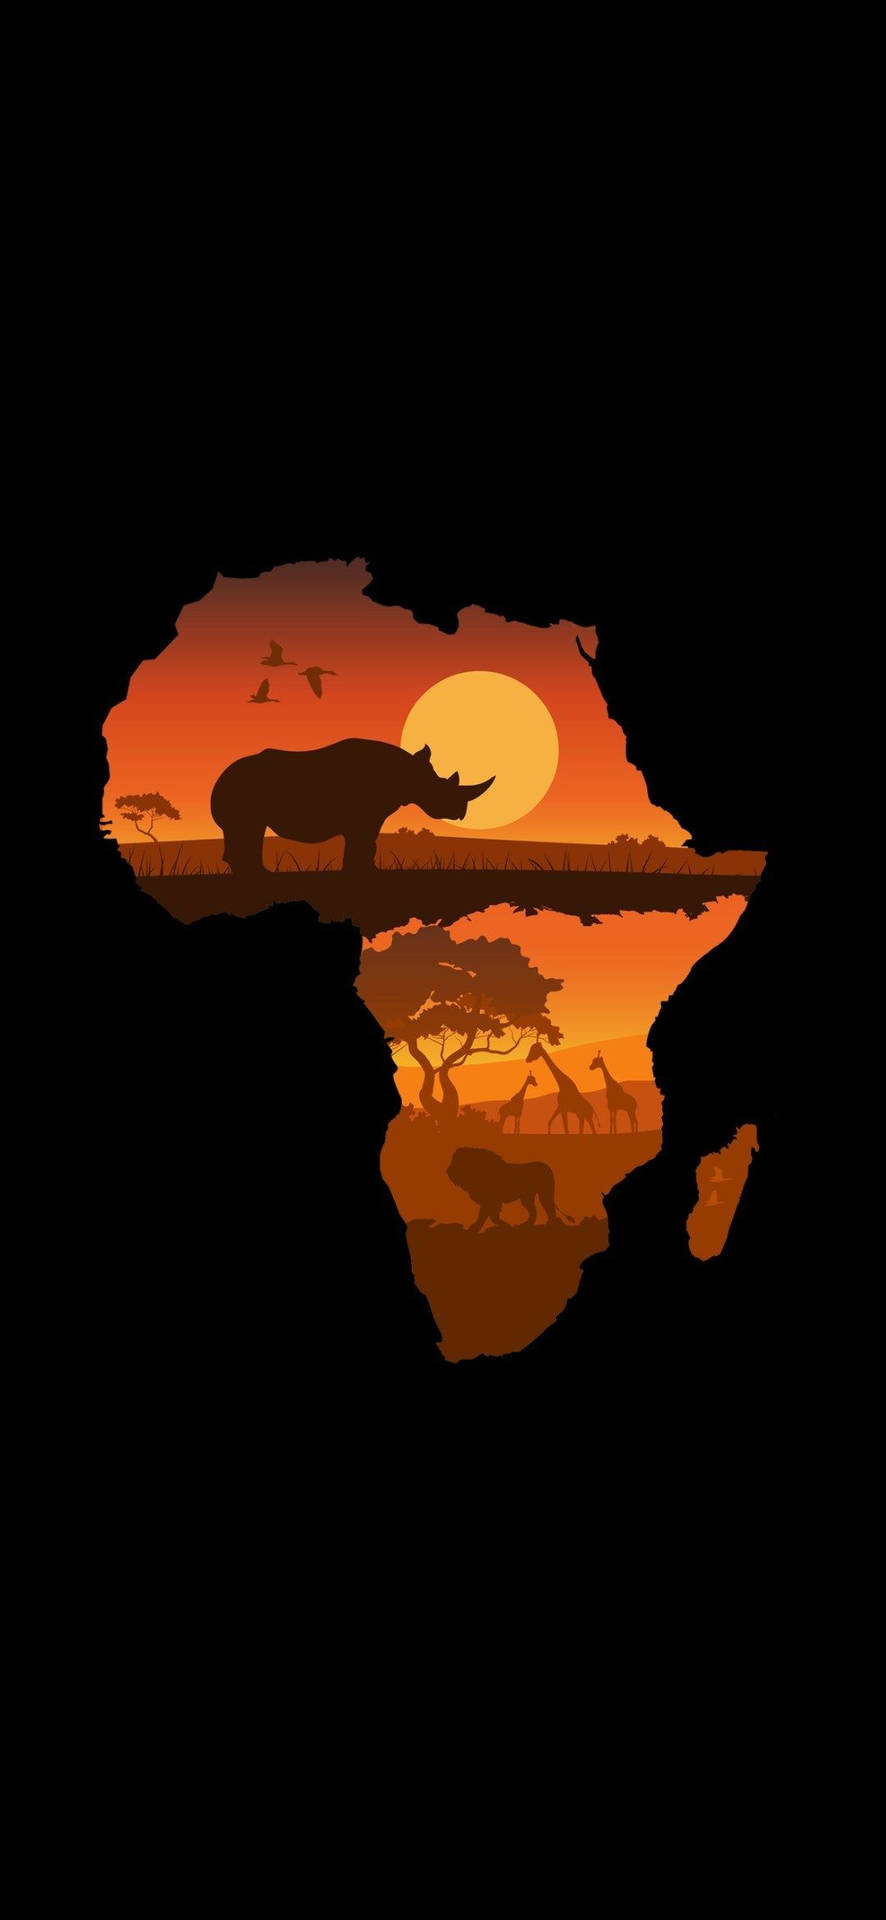 Animals And Continent Africa Iphone